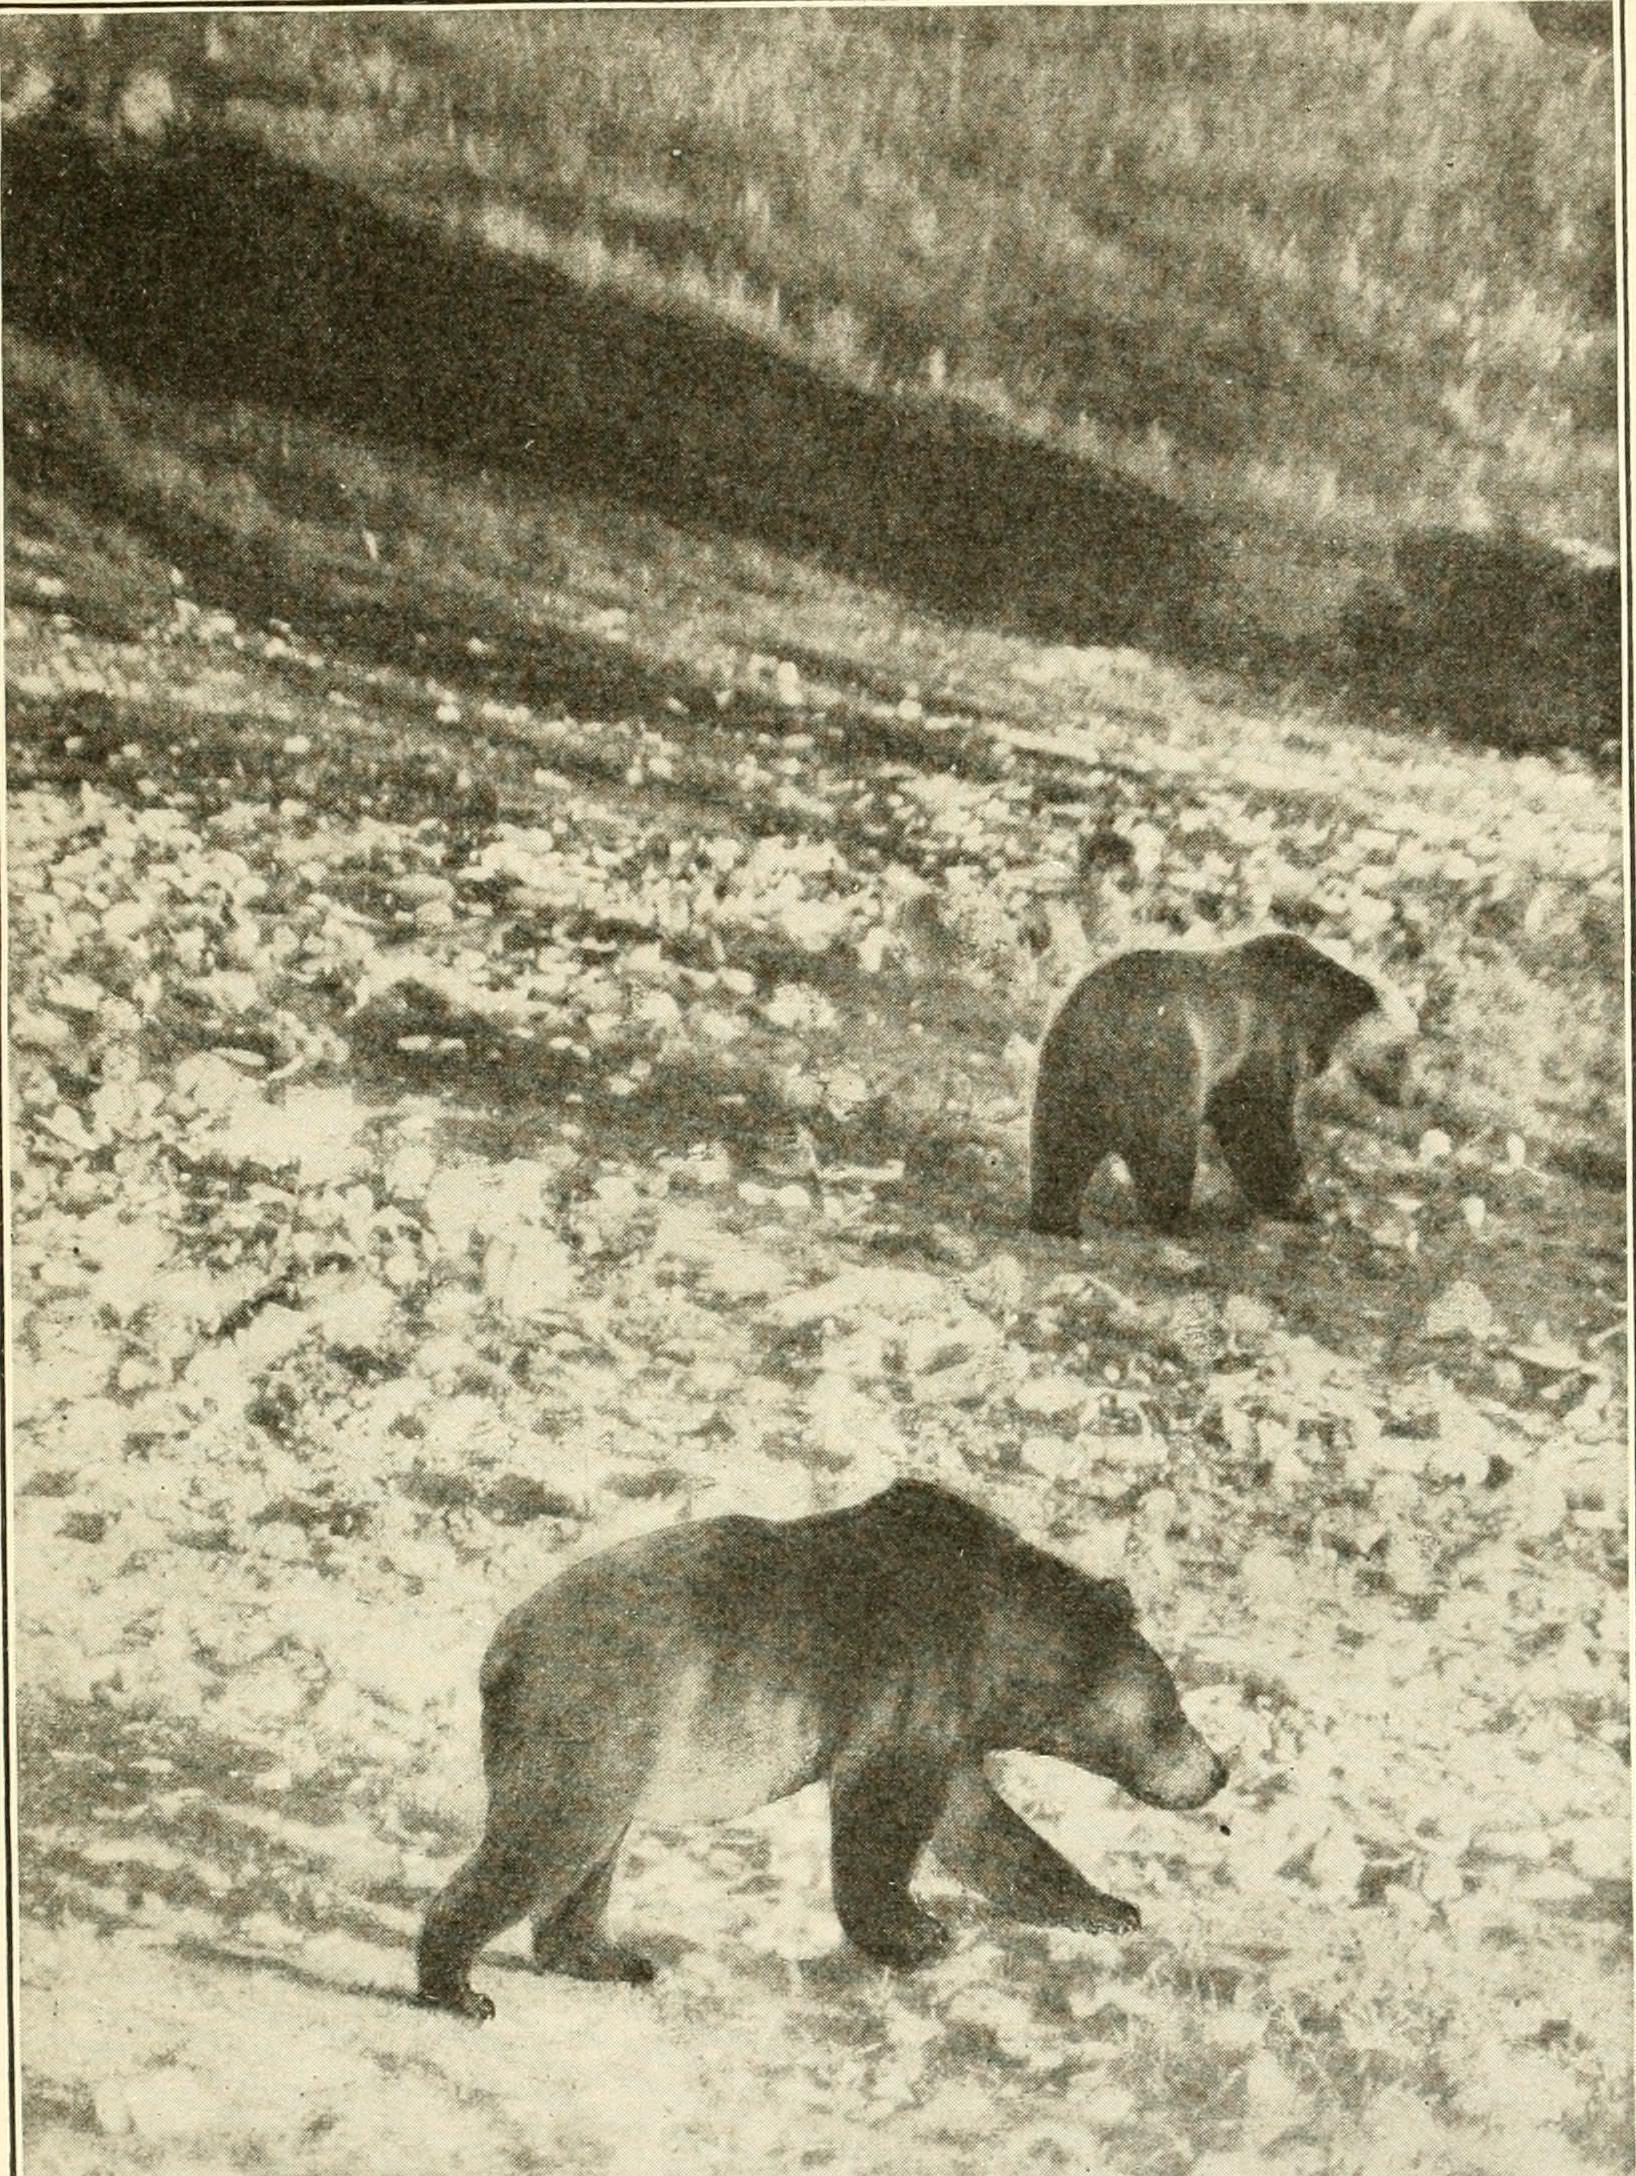 File:Wild animals of Glacier National Park. The mammals, with notes on  physiography and life zones (1918) (14745481251).jpg - Wikimedia Commons